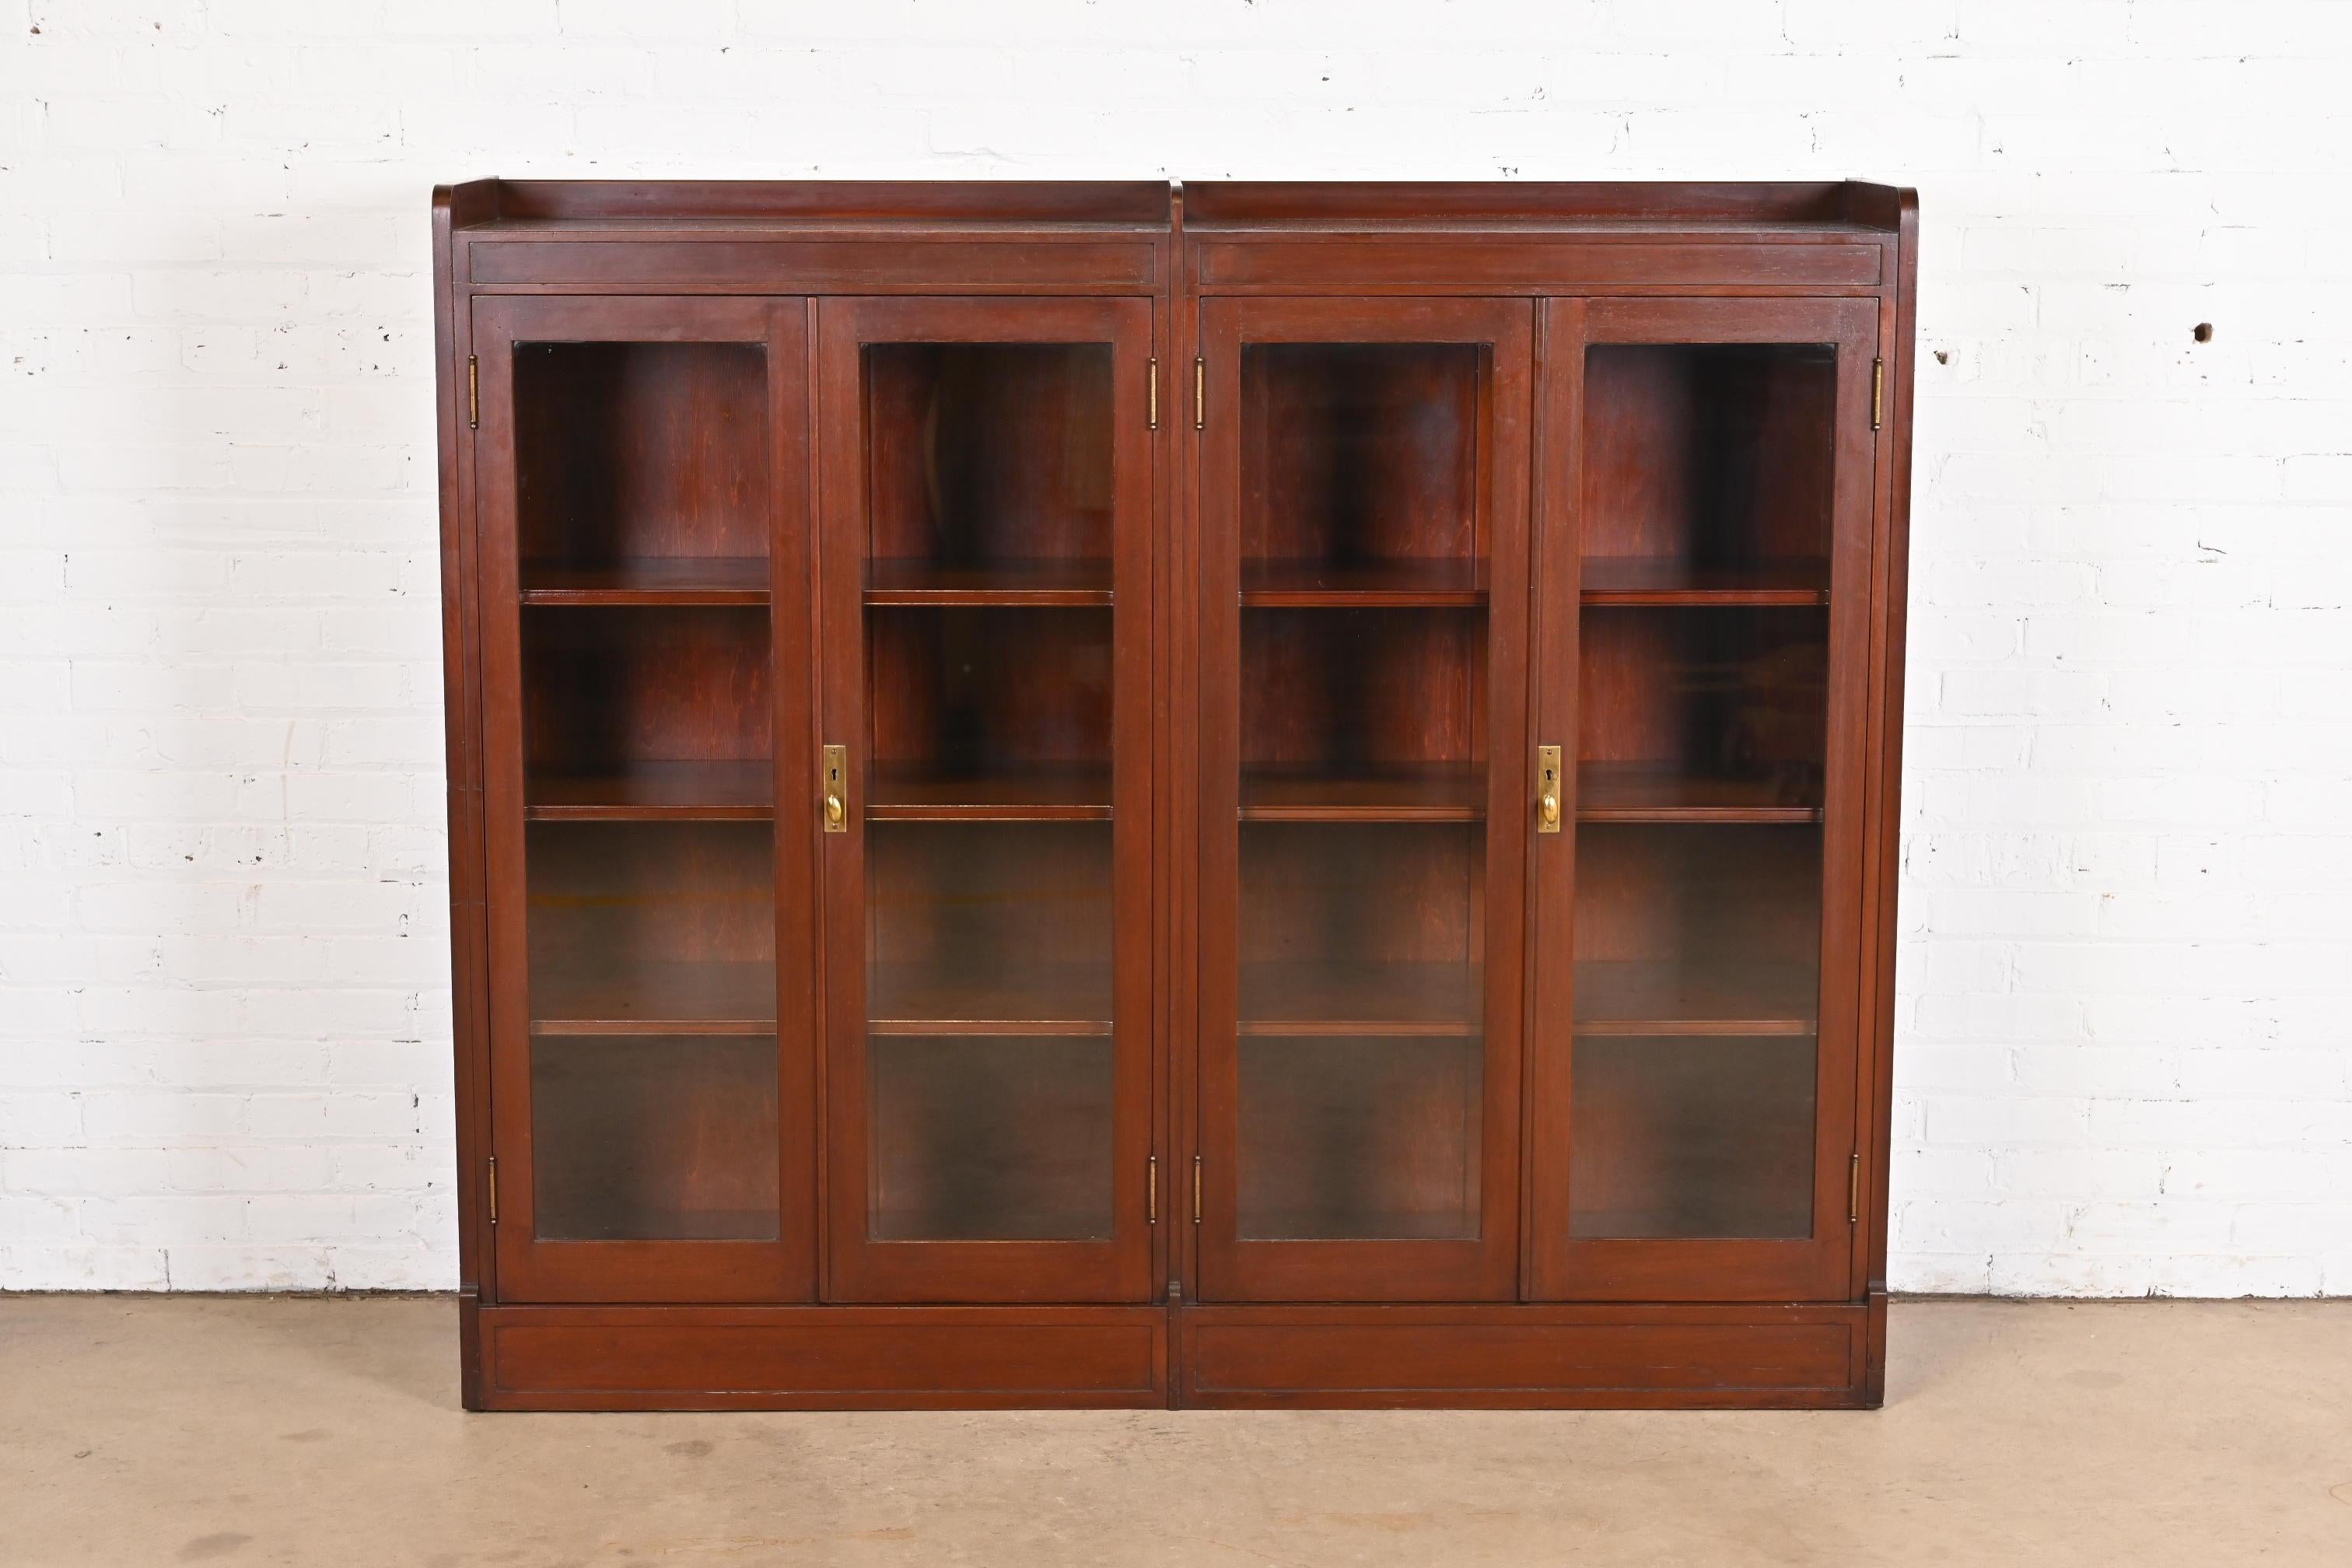 A gorgeous antique Arts & Crafts four-door double bookcase

In the manner of Stickley

USA, Circa 1920s

Solid mahogany, with glass front doors, and original brass hardware.

Measures: 66